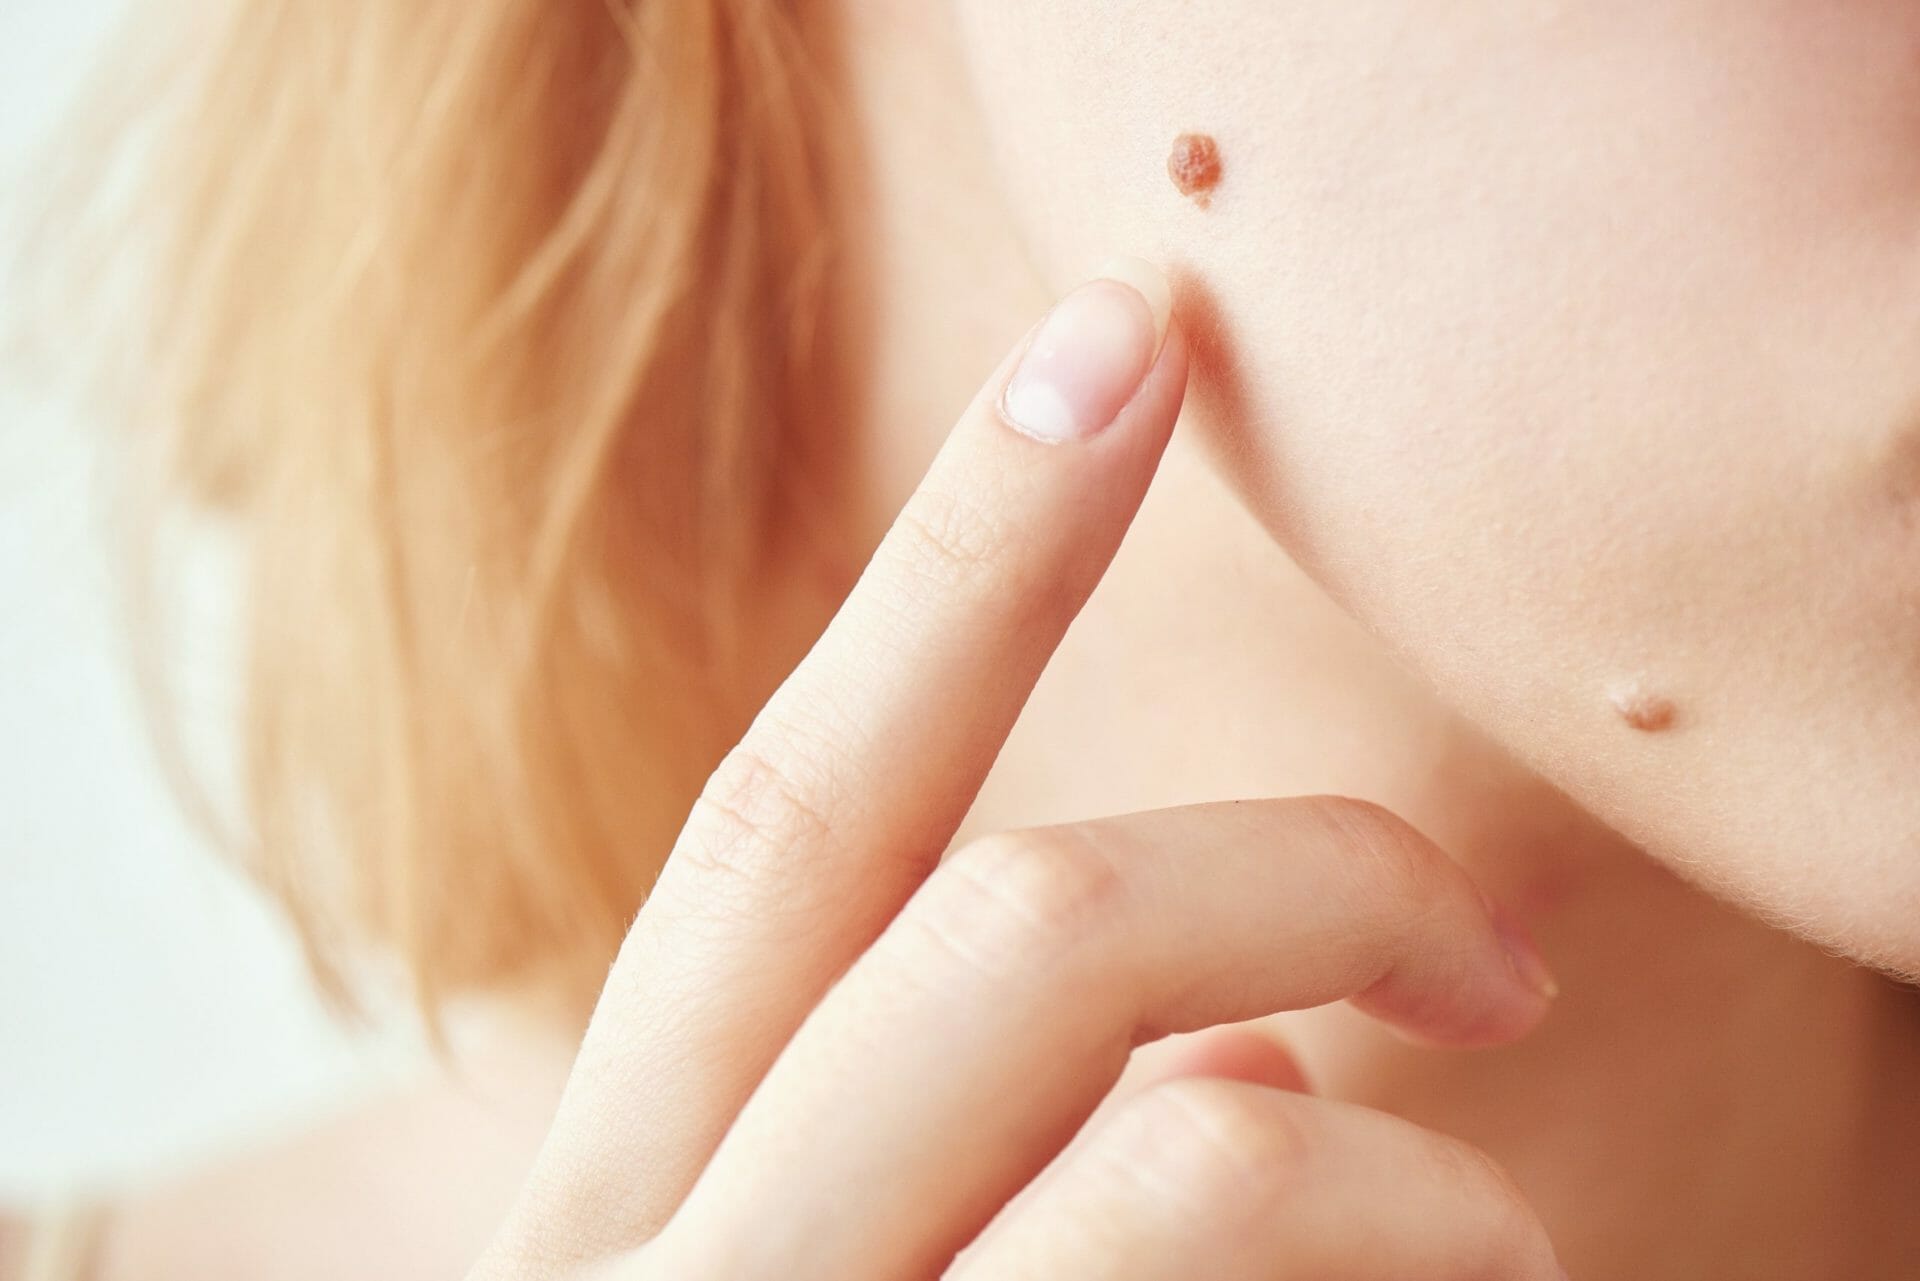 Know How Long Does Mole Removal Take to Heal?